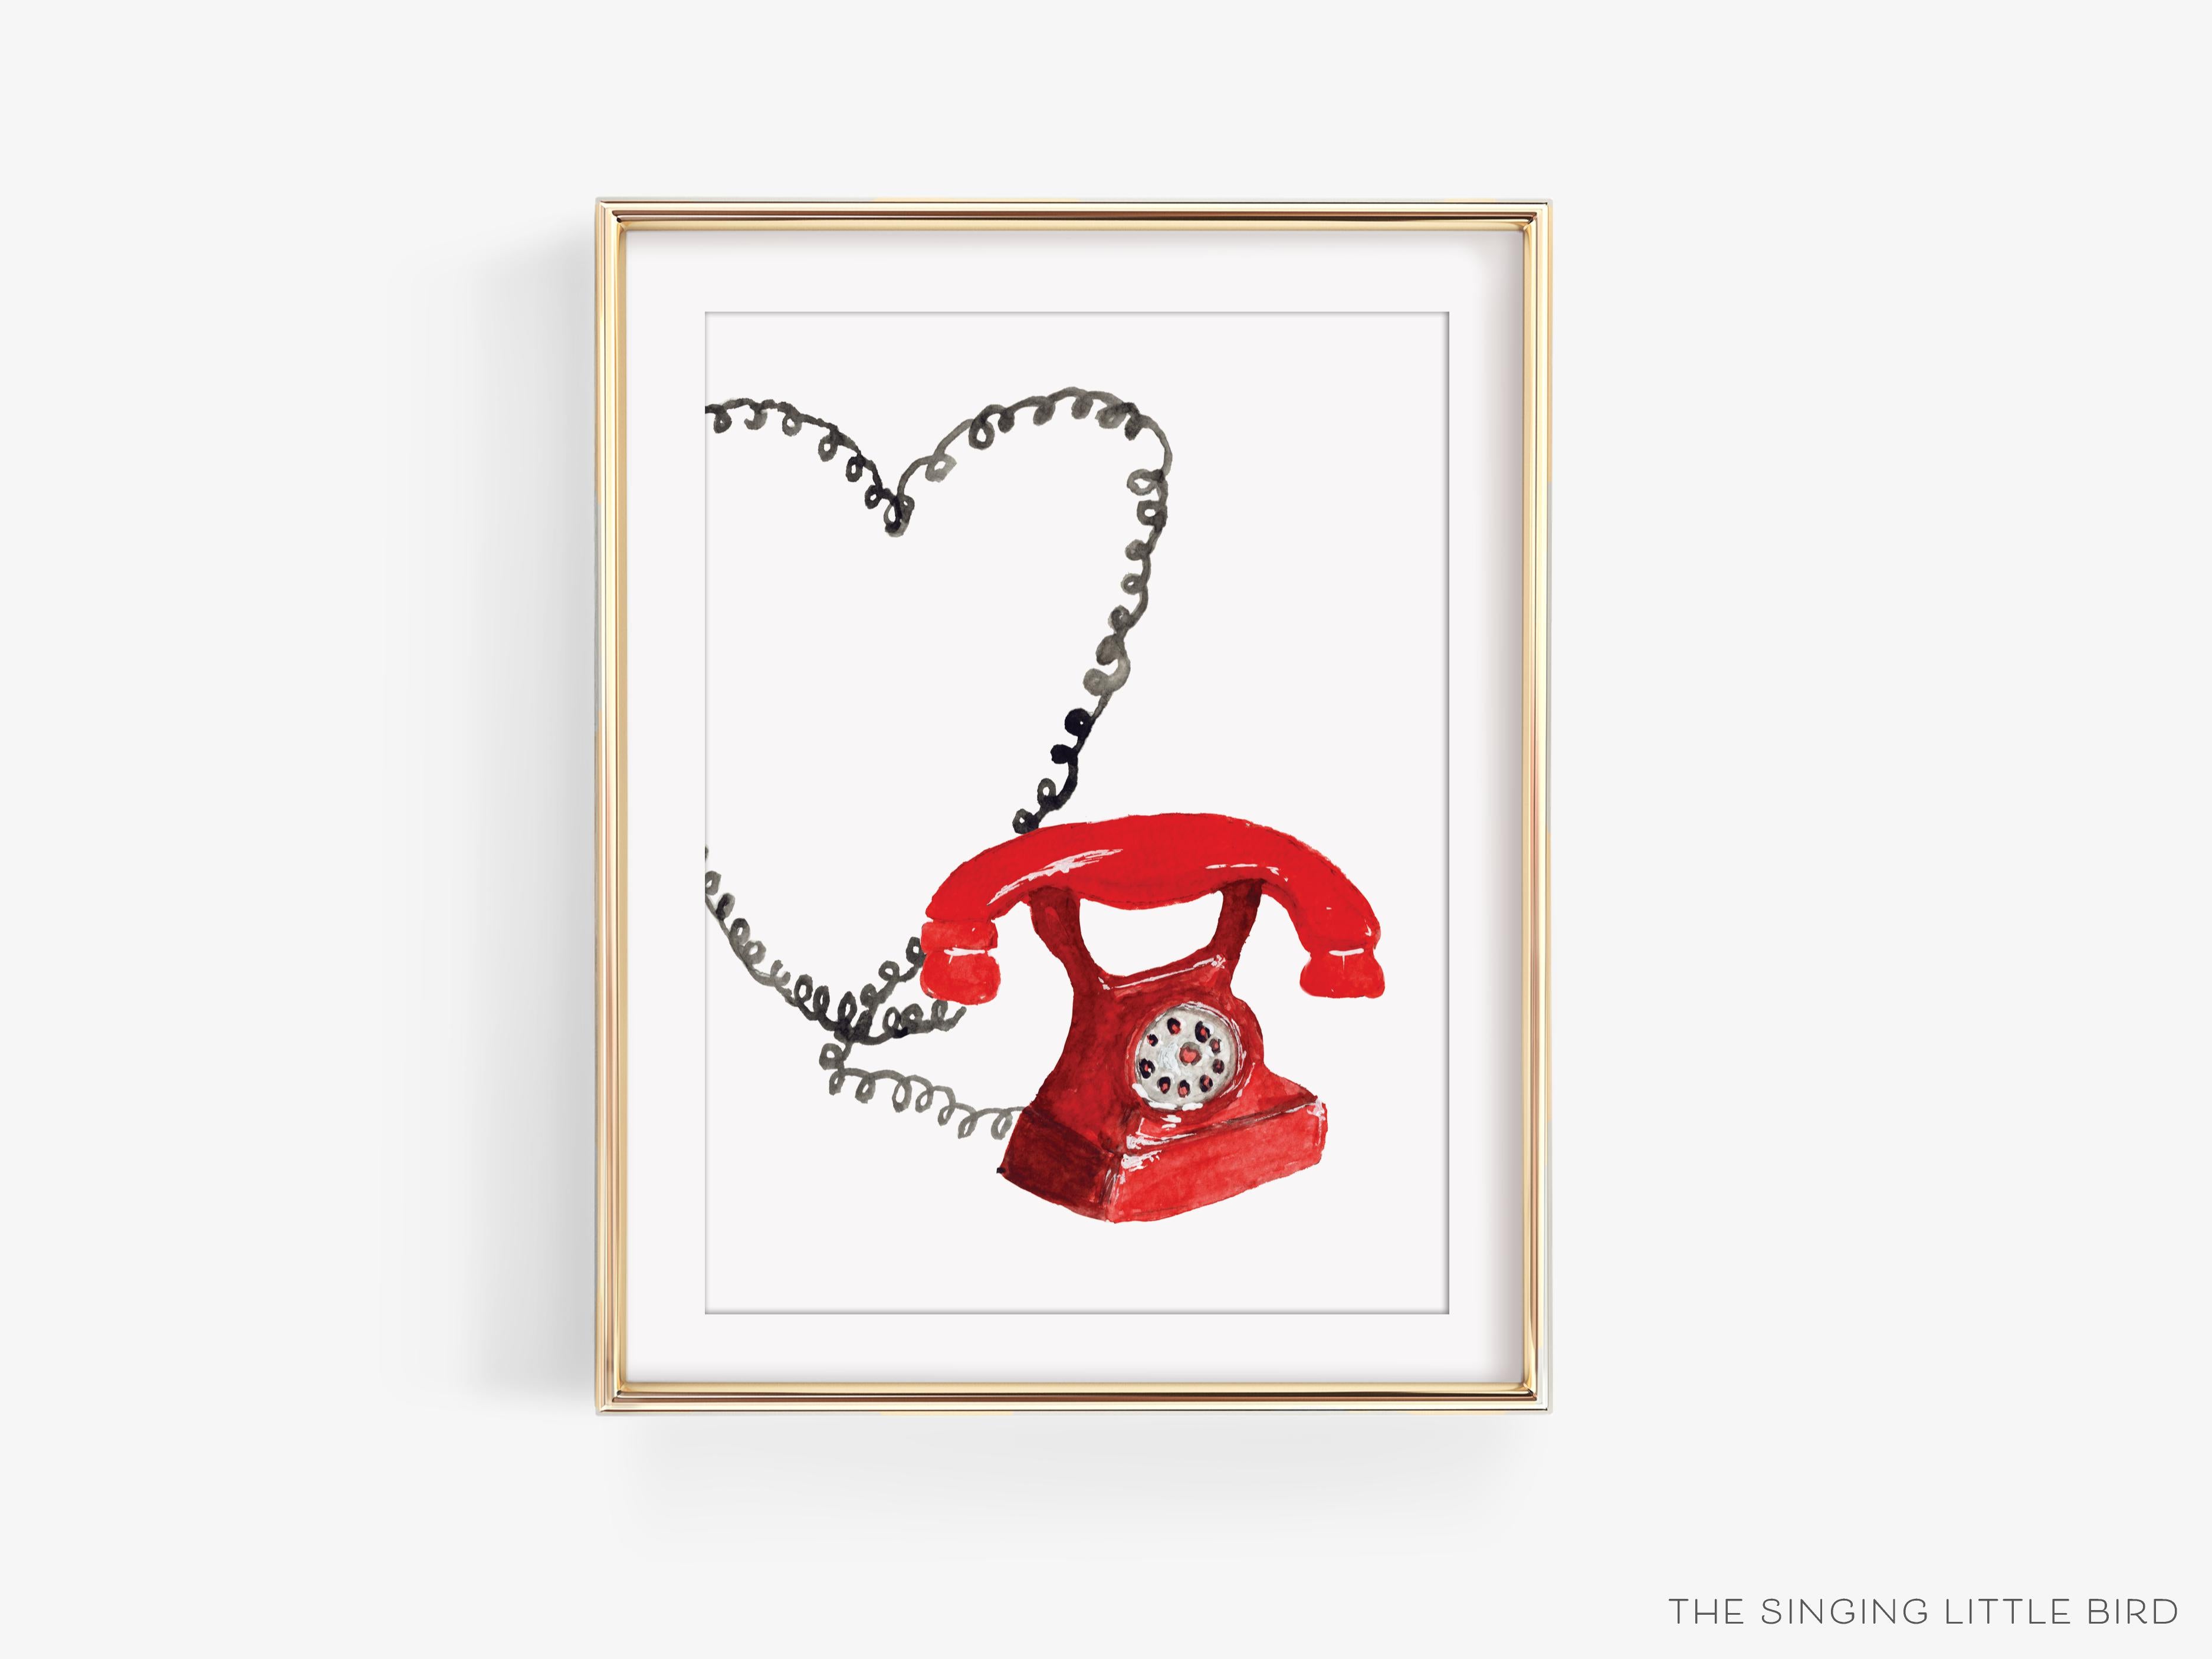 Vintage Telephone Art Print-This watercolor art print features our hand-painted vintage telephone, printed in the USA on 120lb high quality art paper. This makes a great gift or wall decor for the vintage lover in your life.-The Singing Little Bird